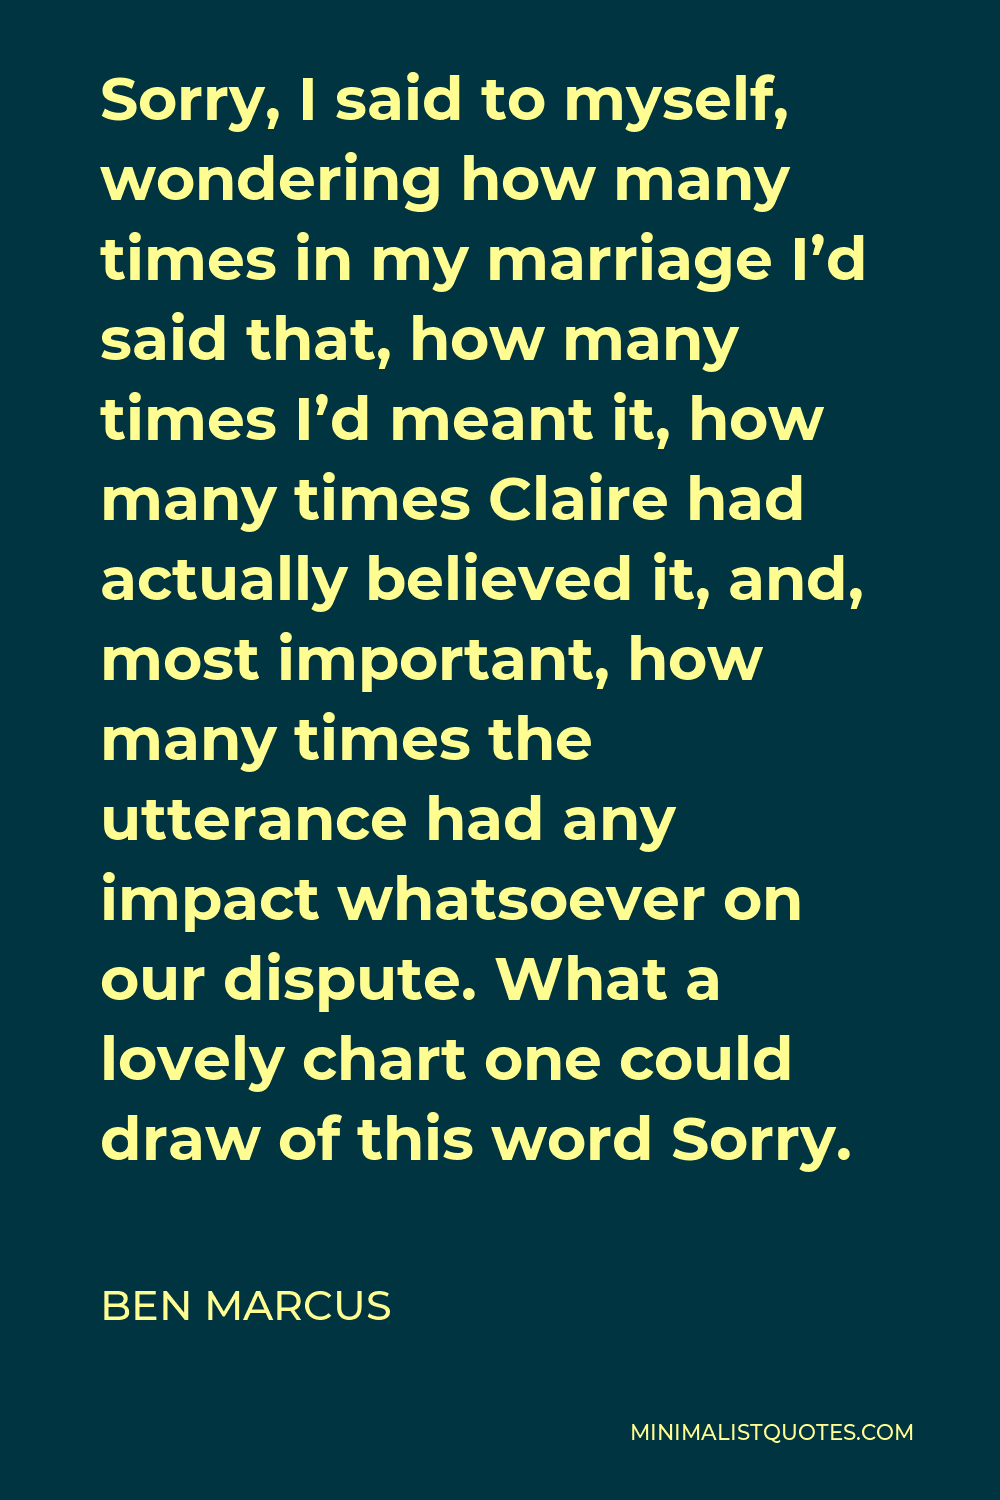 Ben Marcus Quote - Sorry, I said to myself, wondering how many times in my marriage I’d said that, how many times I’d meant it, how many times Claire had actually believed it, and, most important, how many times the utterance had any impact whatsoever on our dispute. What a lovely chart one could draw of this word Sorry.